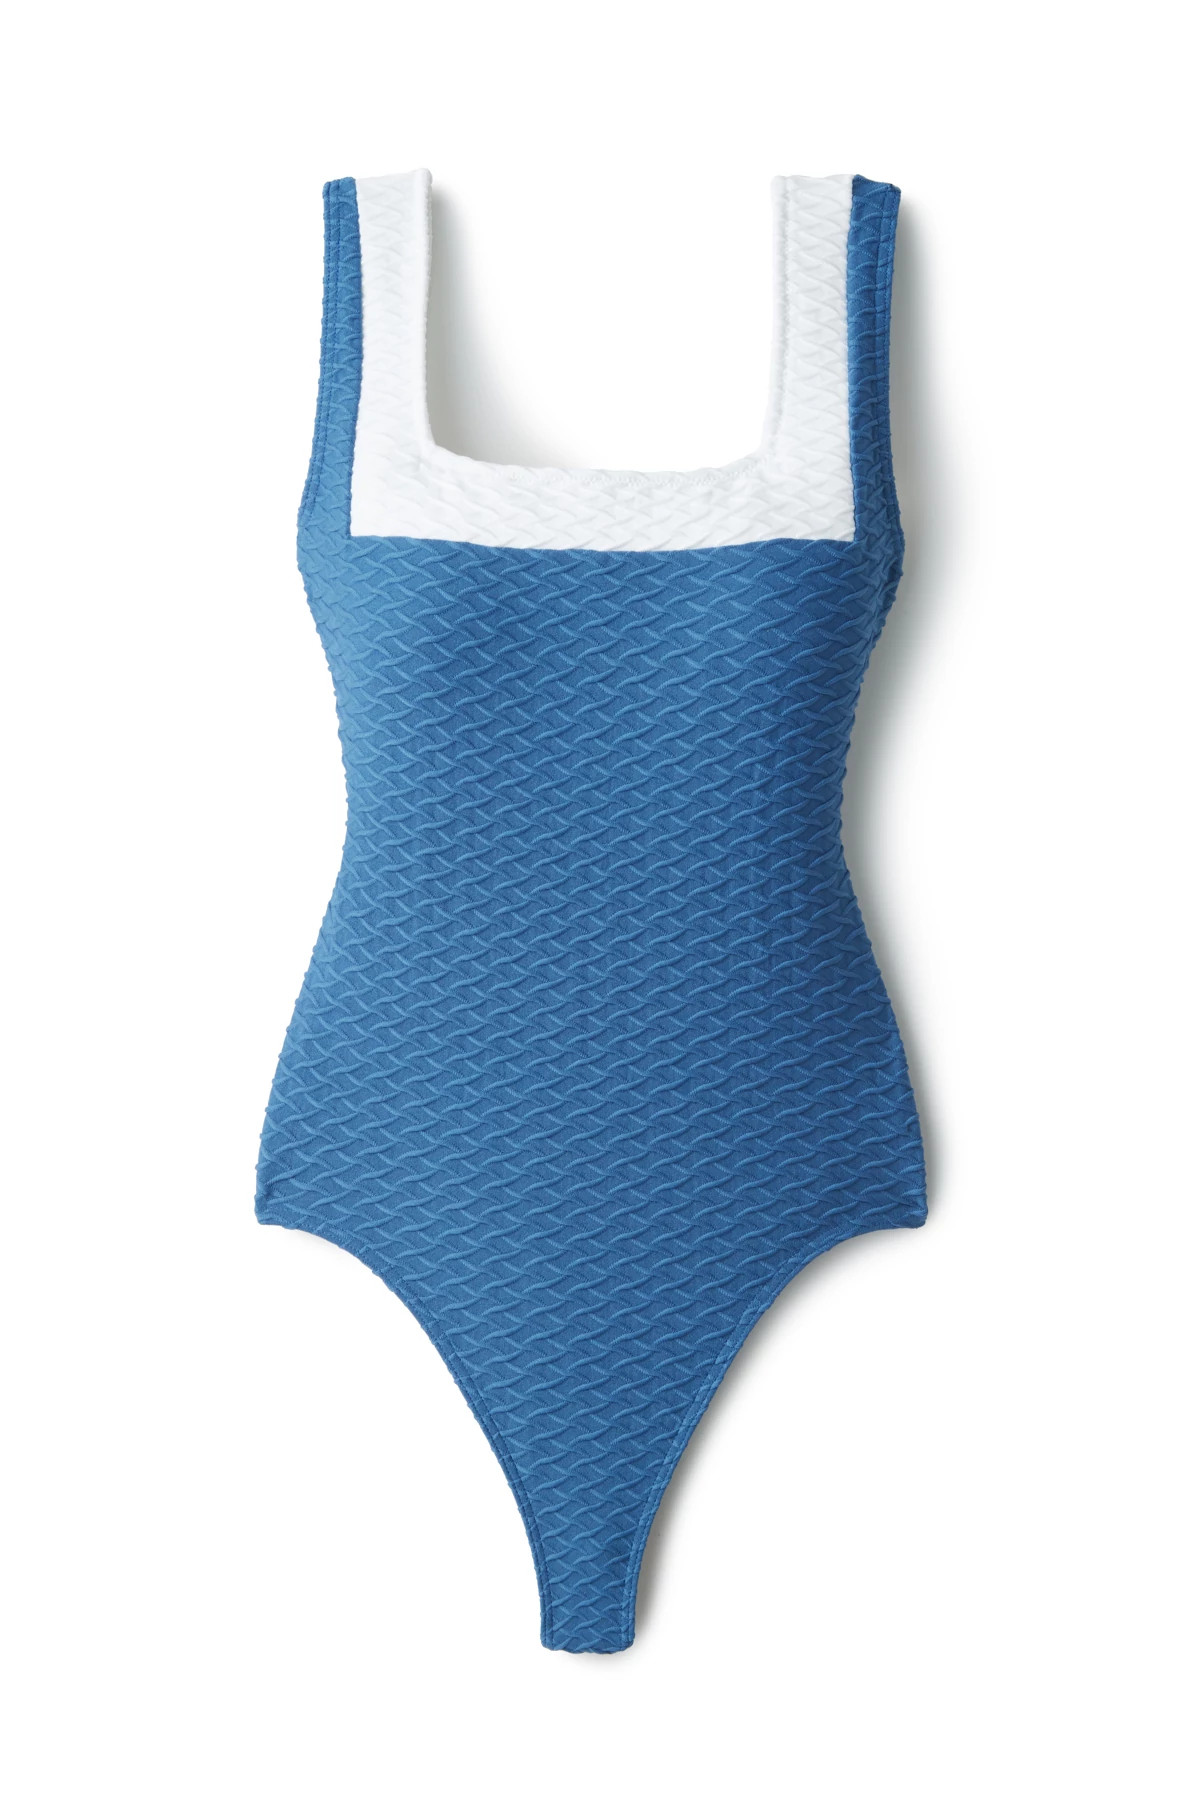 LINEN Textured One Piece Swimsuit image number 4